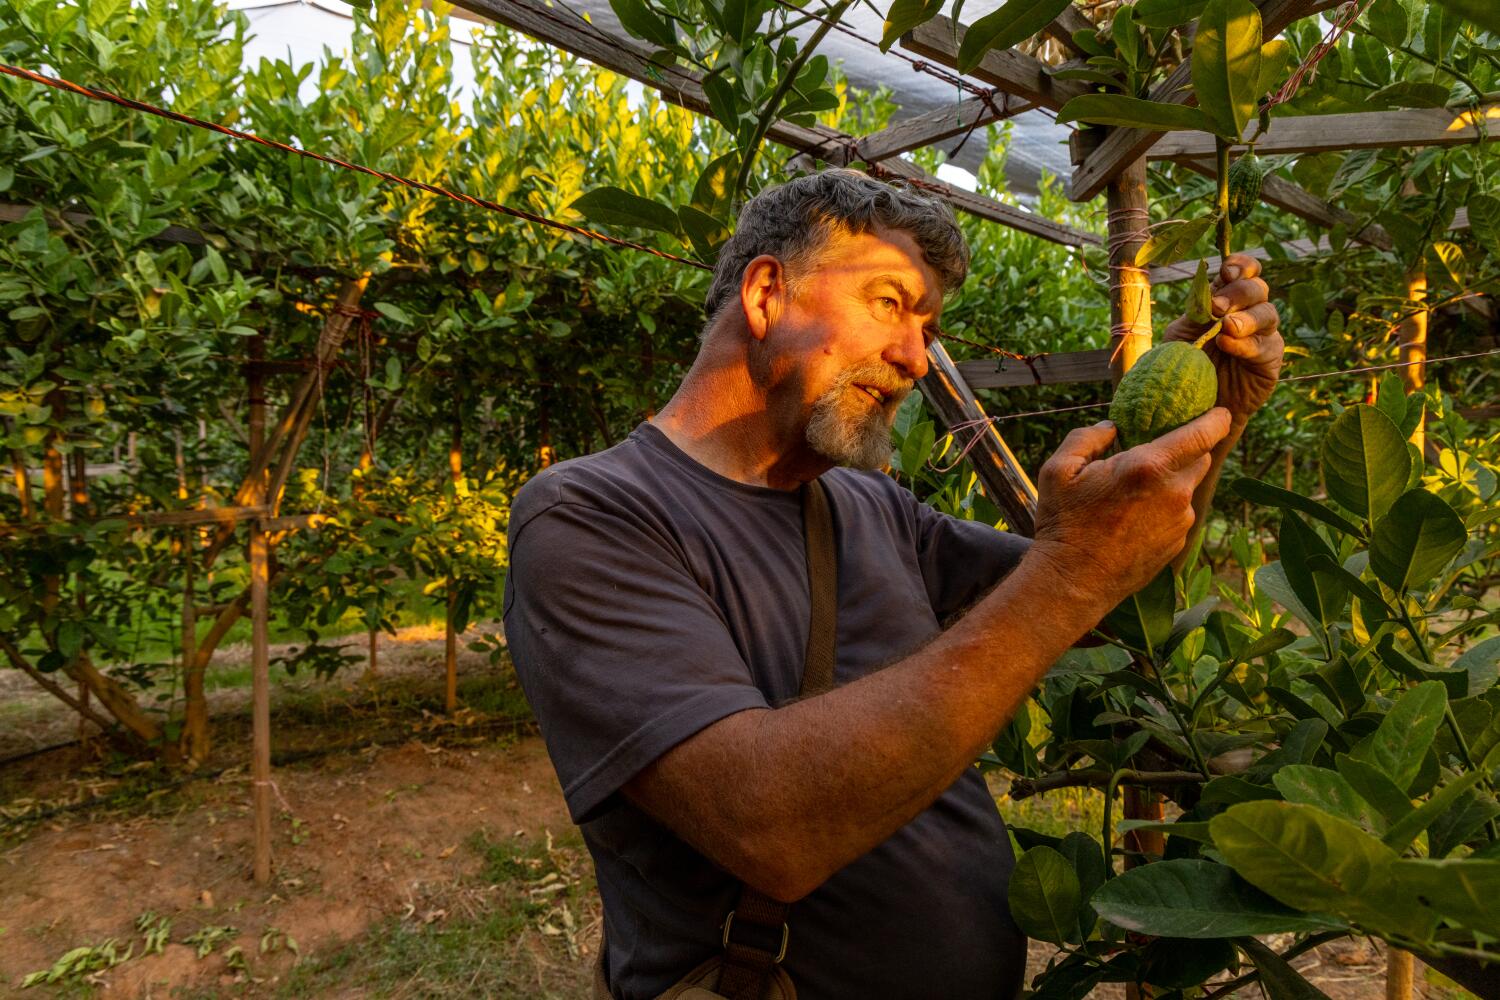 Jews need the rare etrog fruit for Sukkot. That's where a Presbyterian family comes in